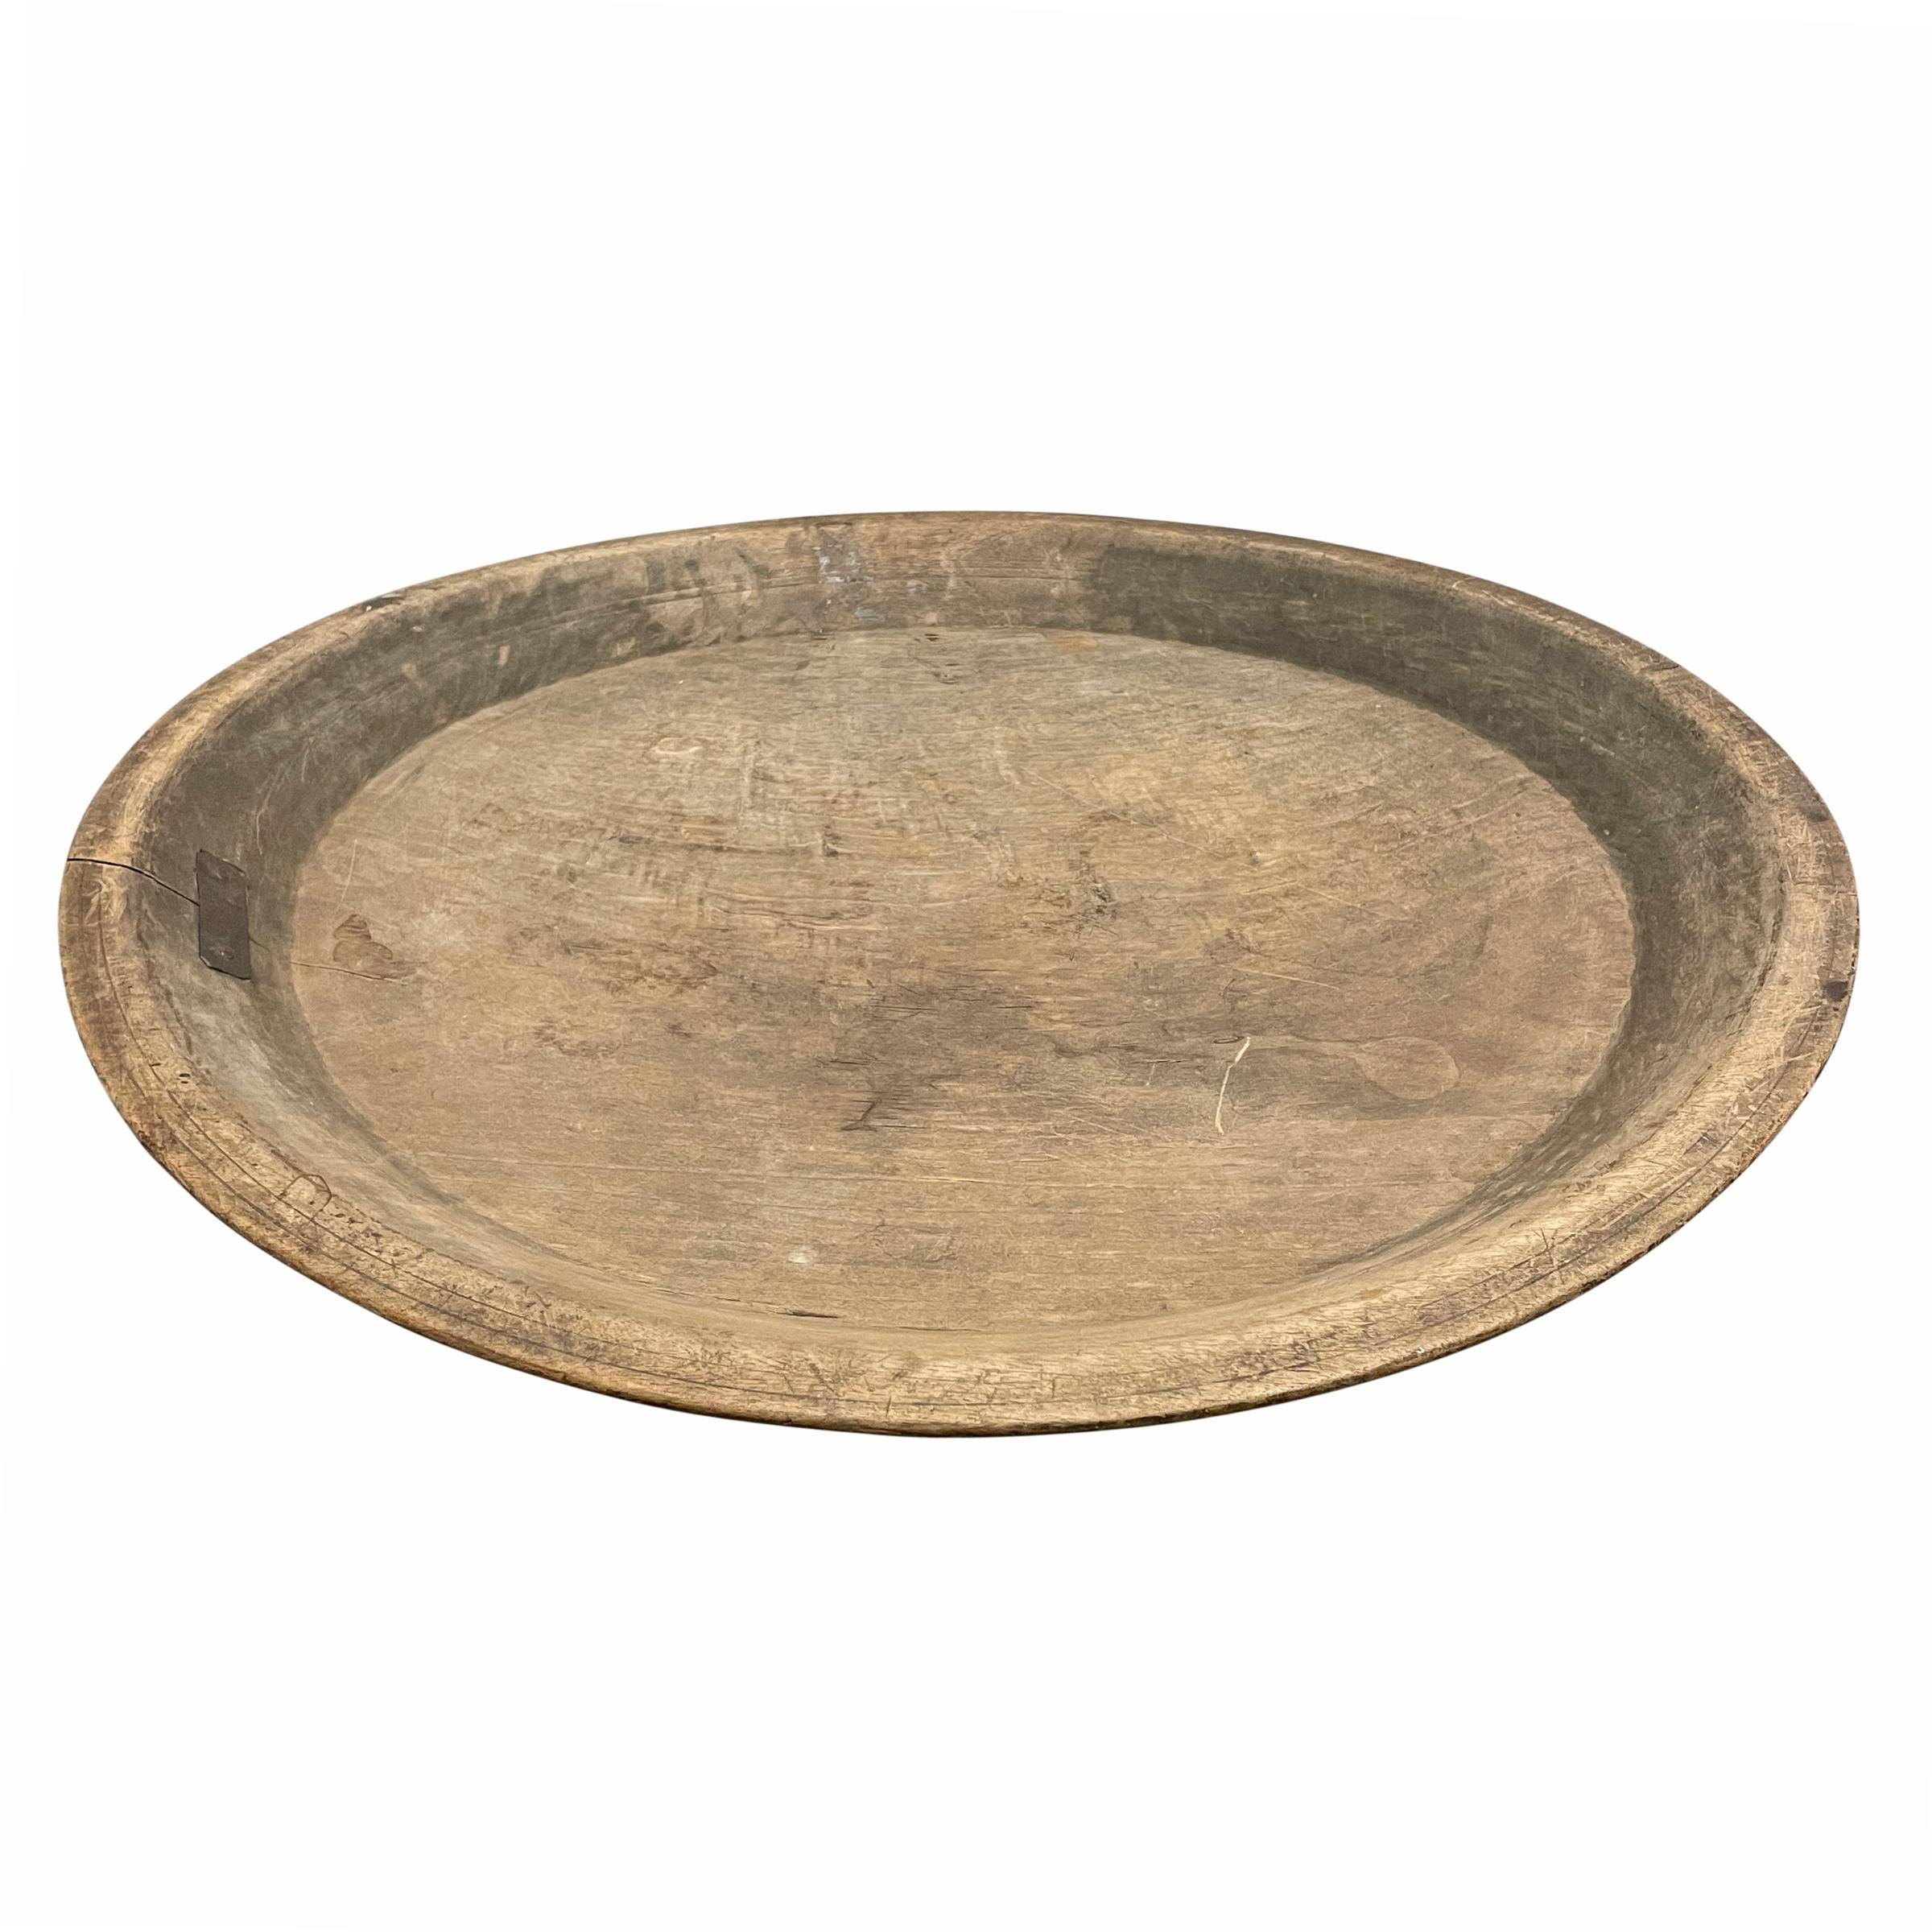 Primitive 18th Century American Turned Wood Platter For Sale